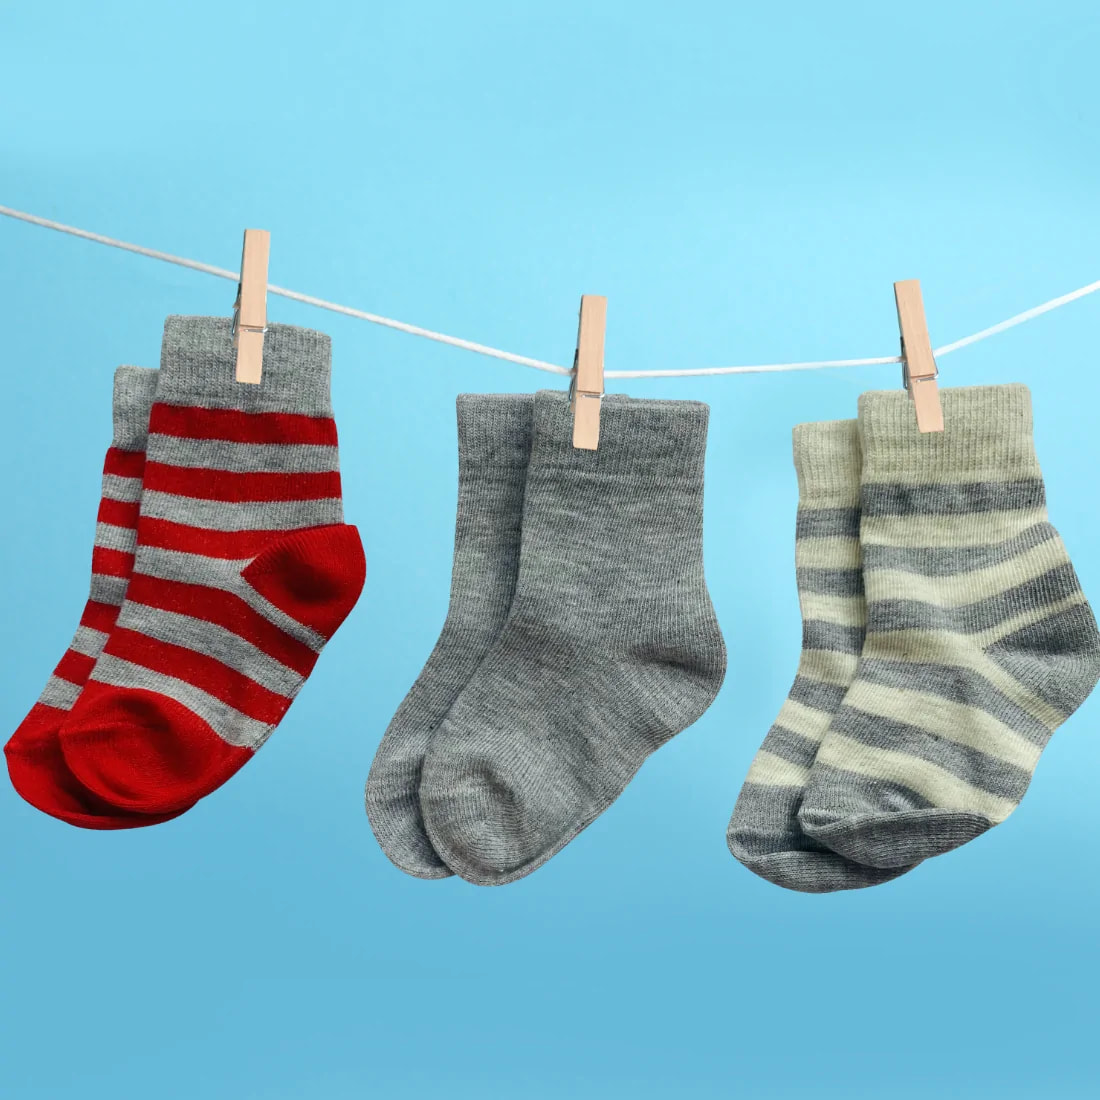 Antibacterial Baby Socks - Elasticated & Ankle Length - (6-12 Months) Unisex Grey Striped & Solid